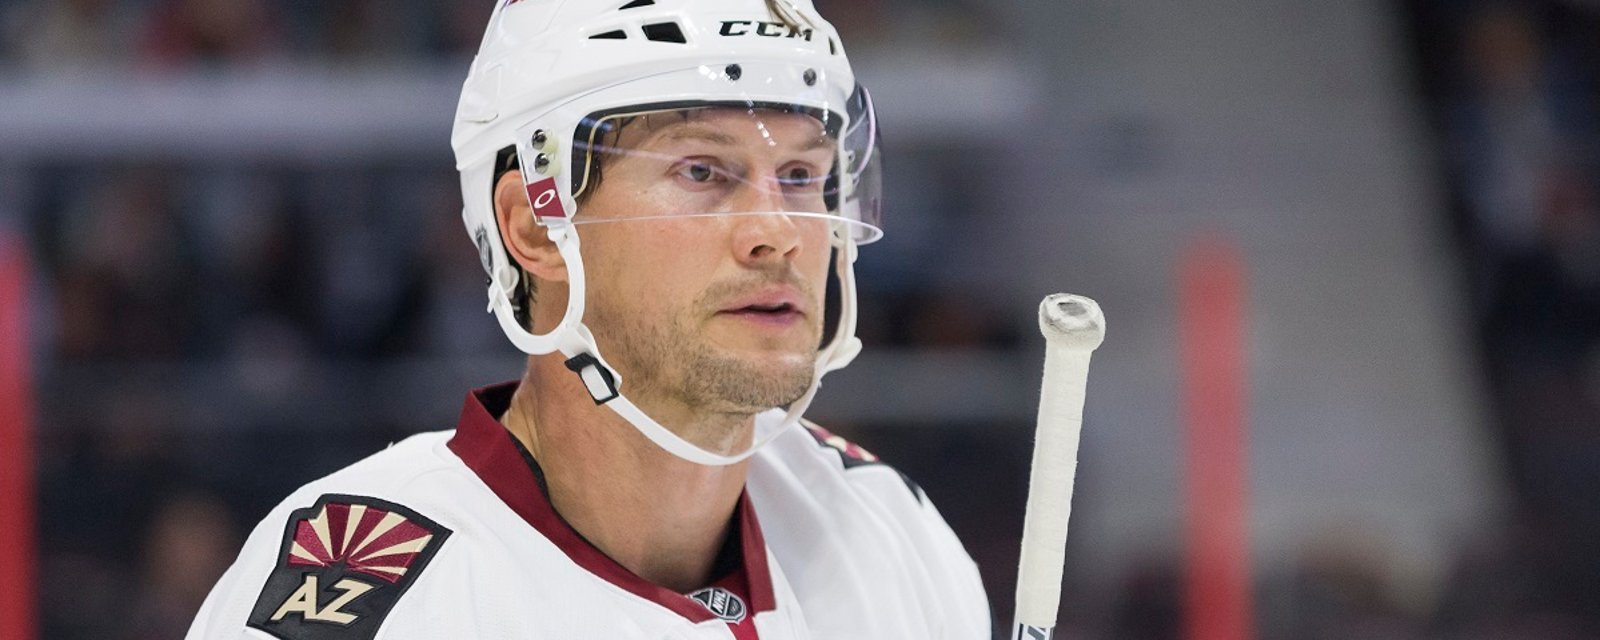 Shane Doan reveals the epic prank that turned his “junk” purple for 5 days.